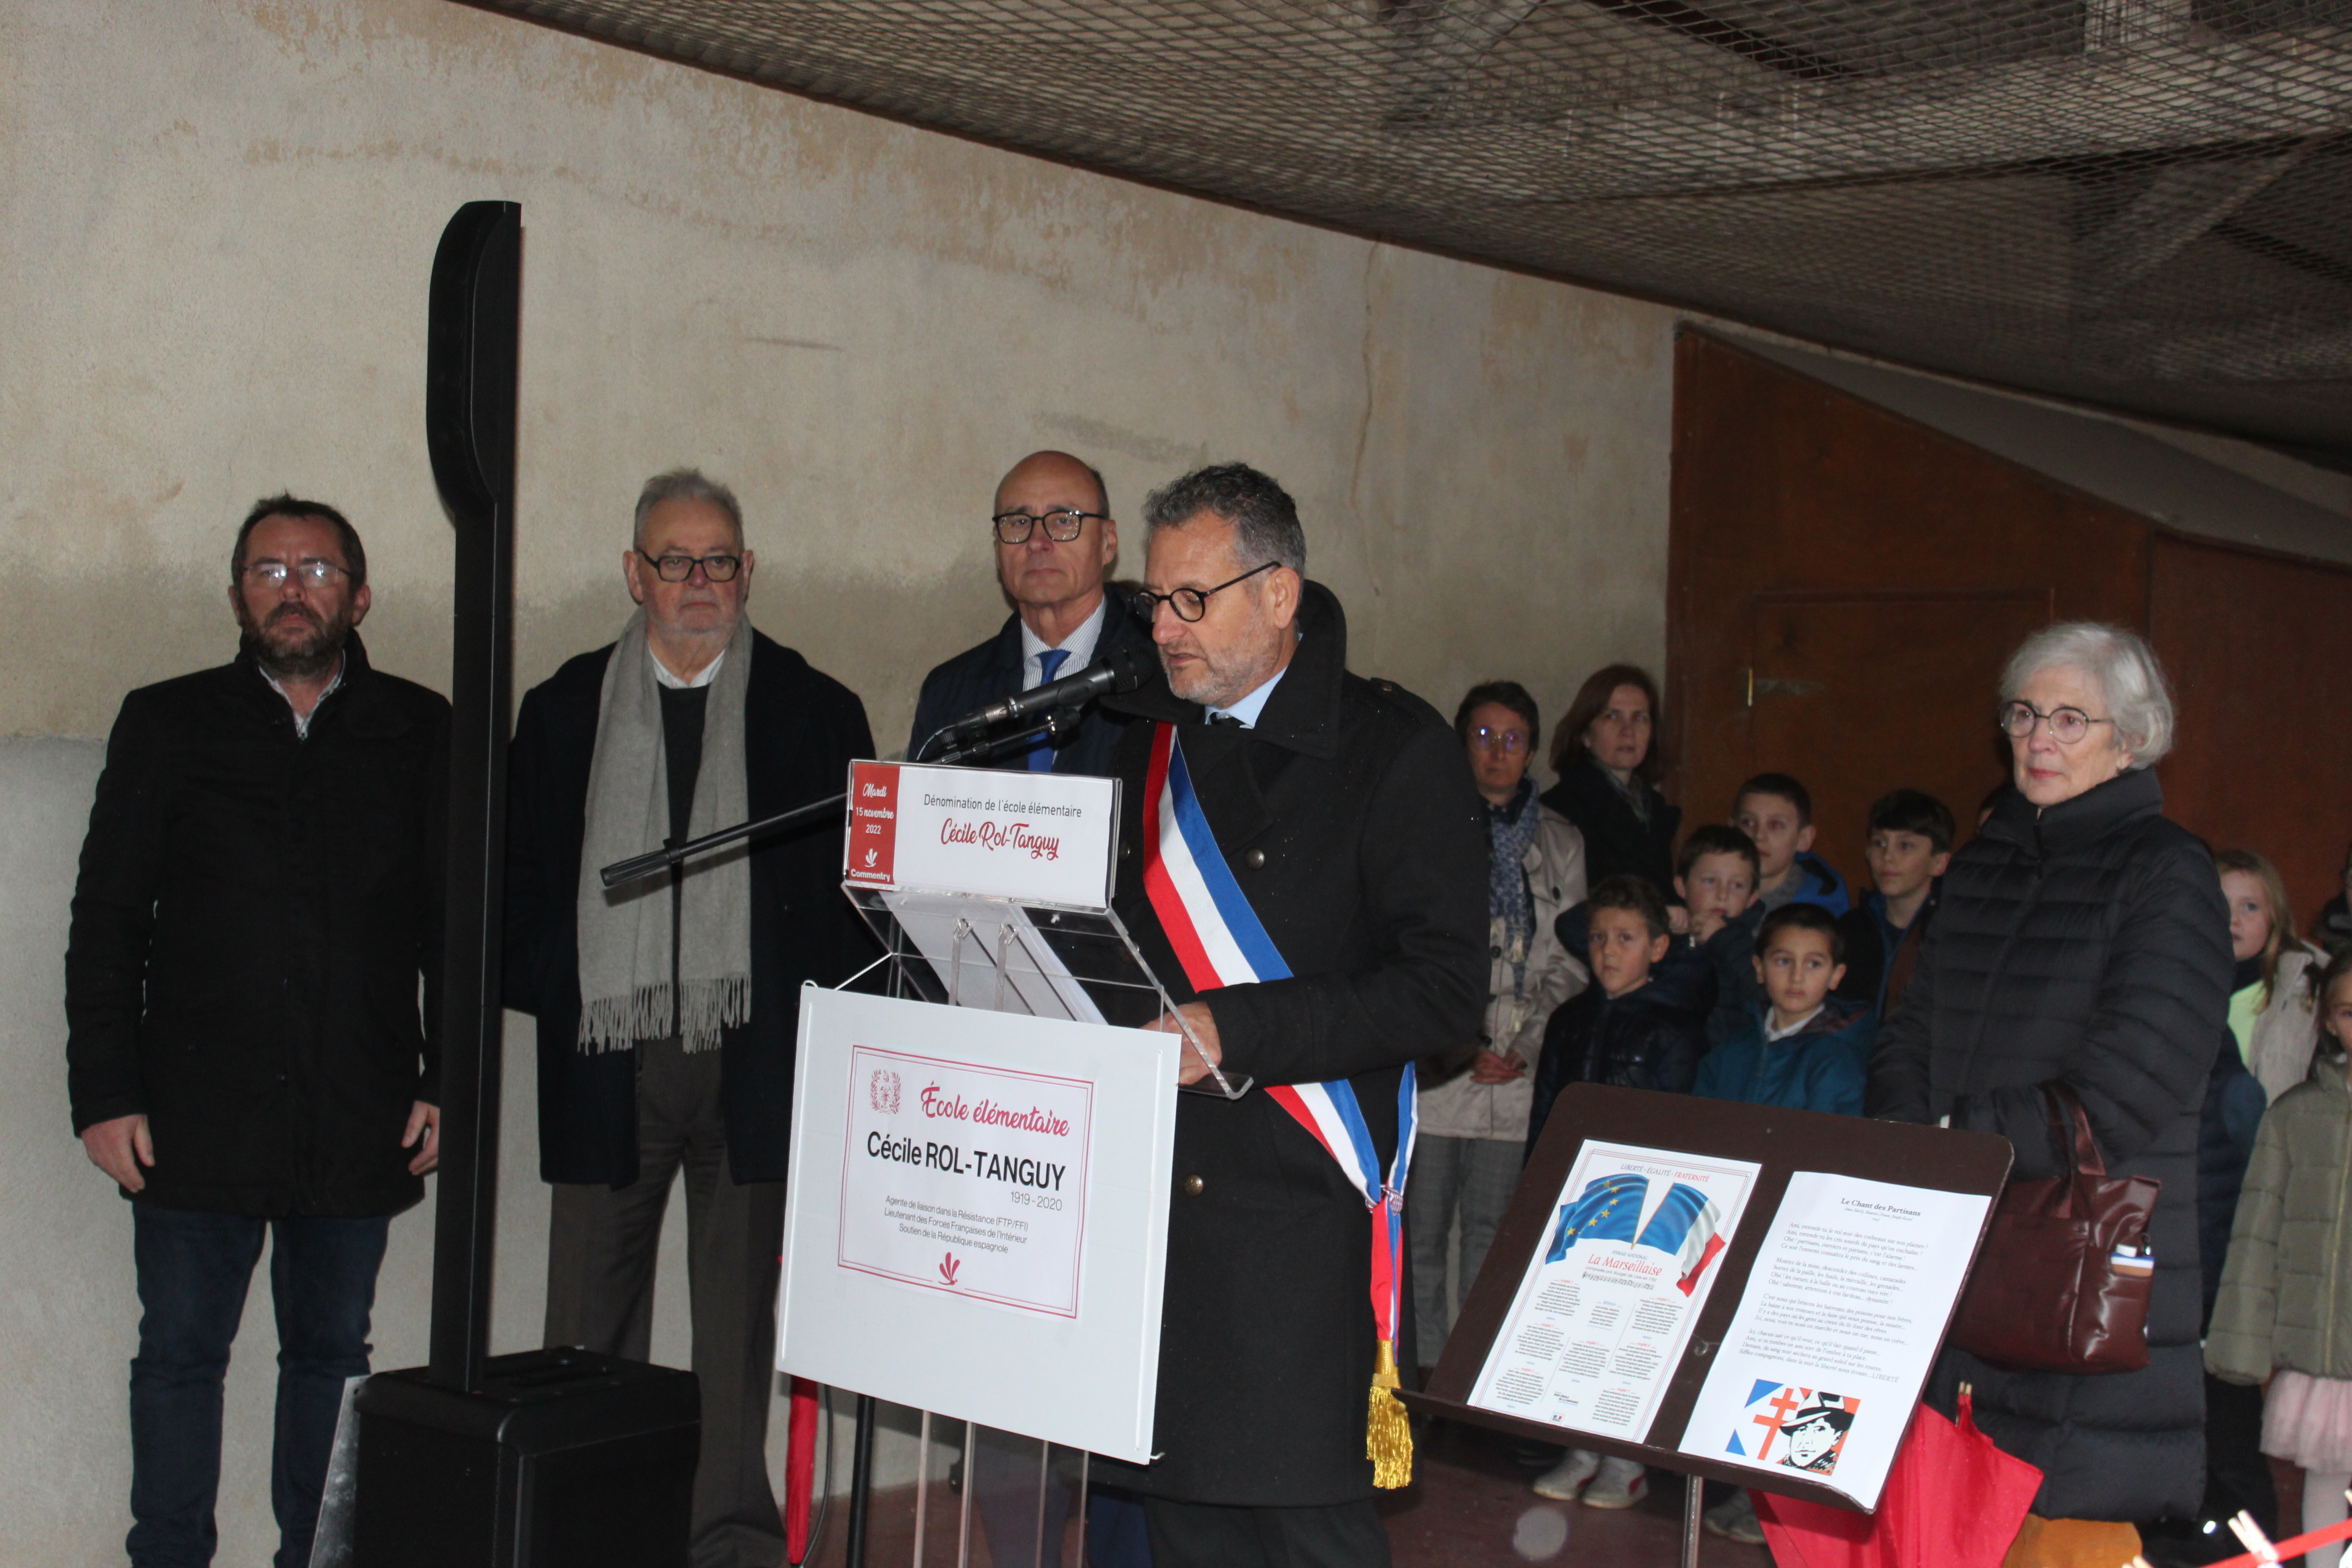 INAUGURATION ECOLE POURCHEROUX CECILE ROL TANGUY BOURDIER.JPG (5.54 MB)